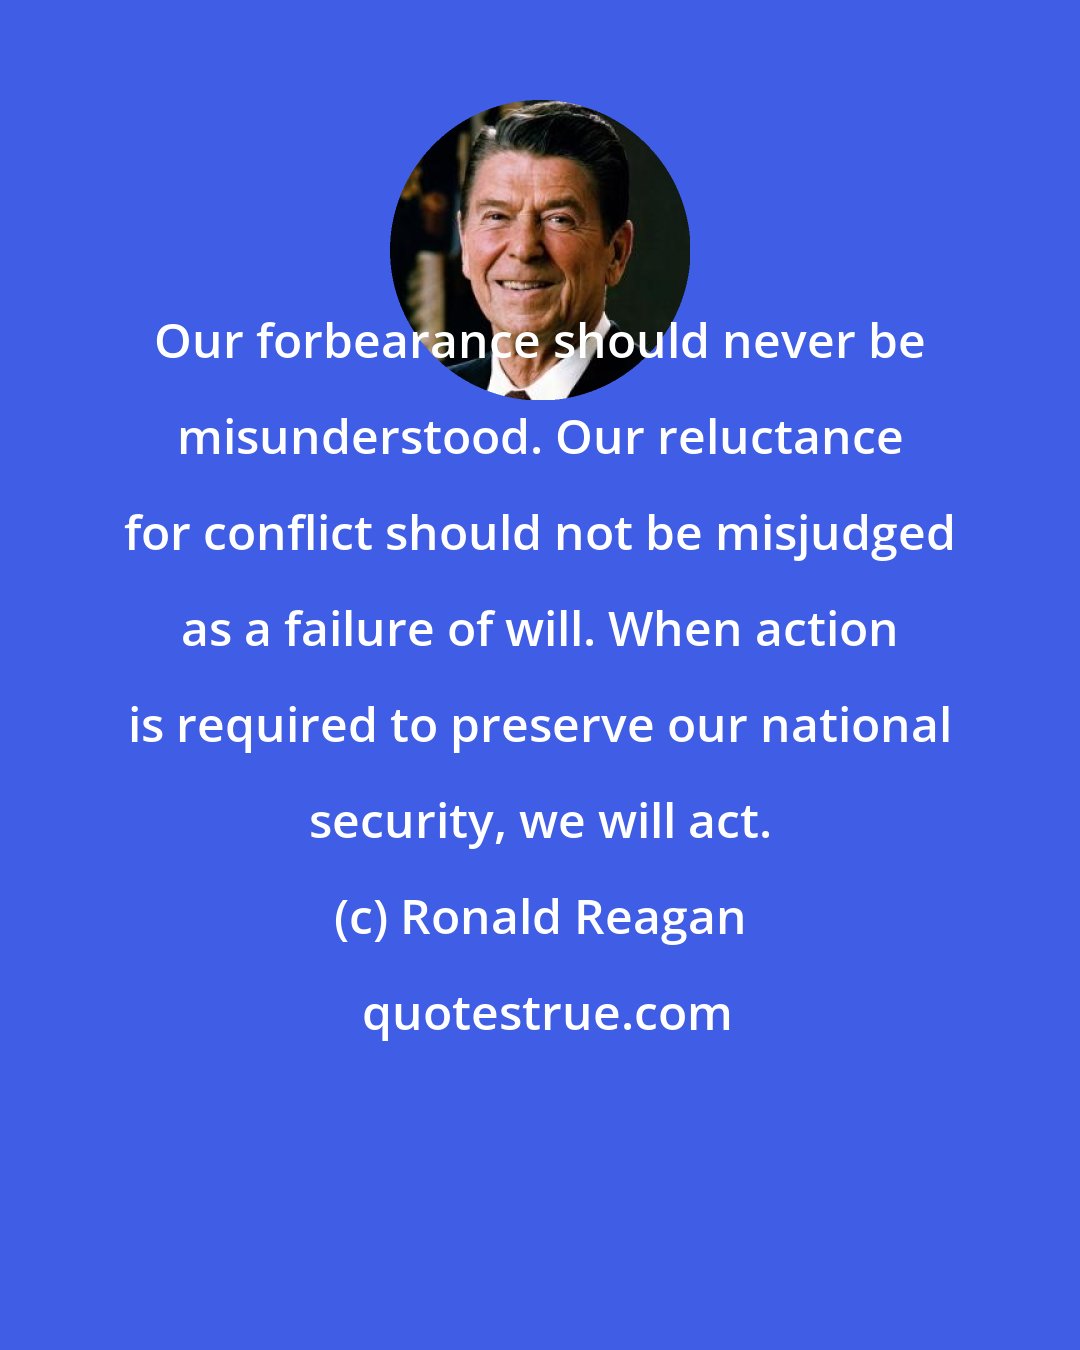 Ronald Reagan: Our forbearance should never be misunderstood. Our reluctance for conflict should not be misjudged as a failure of will. When action is required to preserve our national security, we will act.